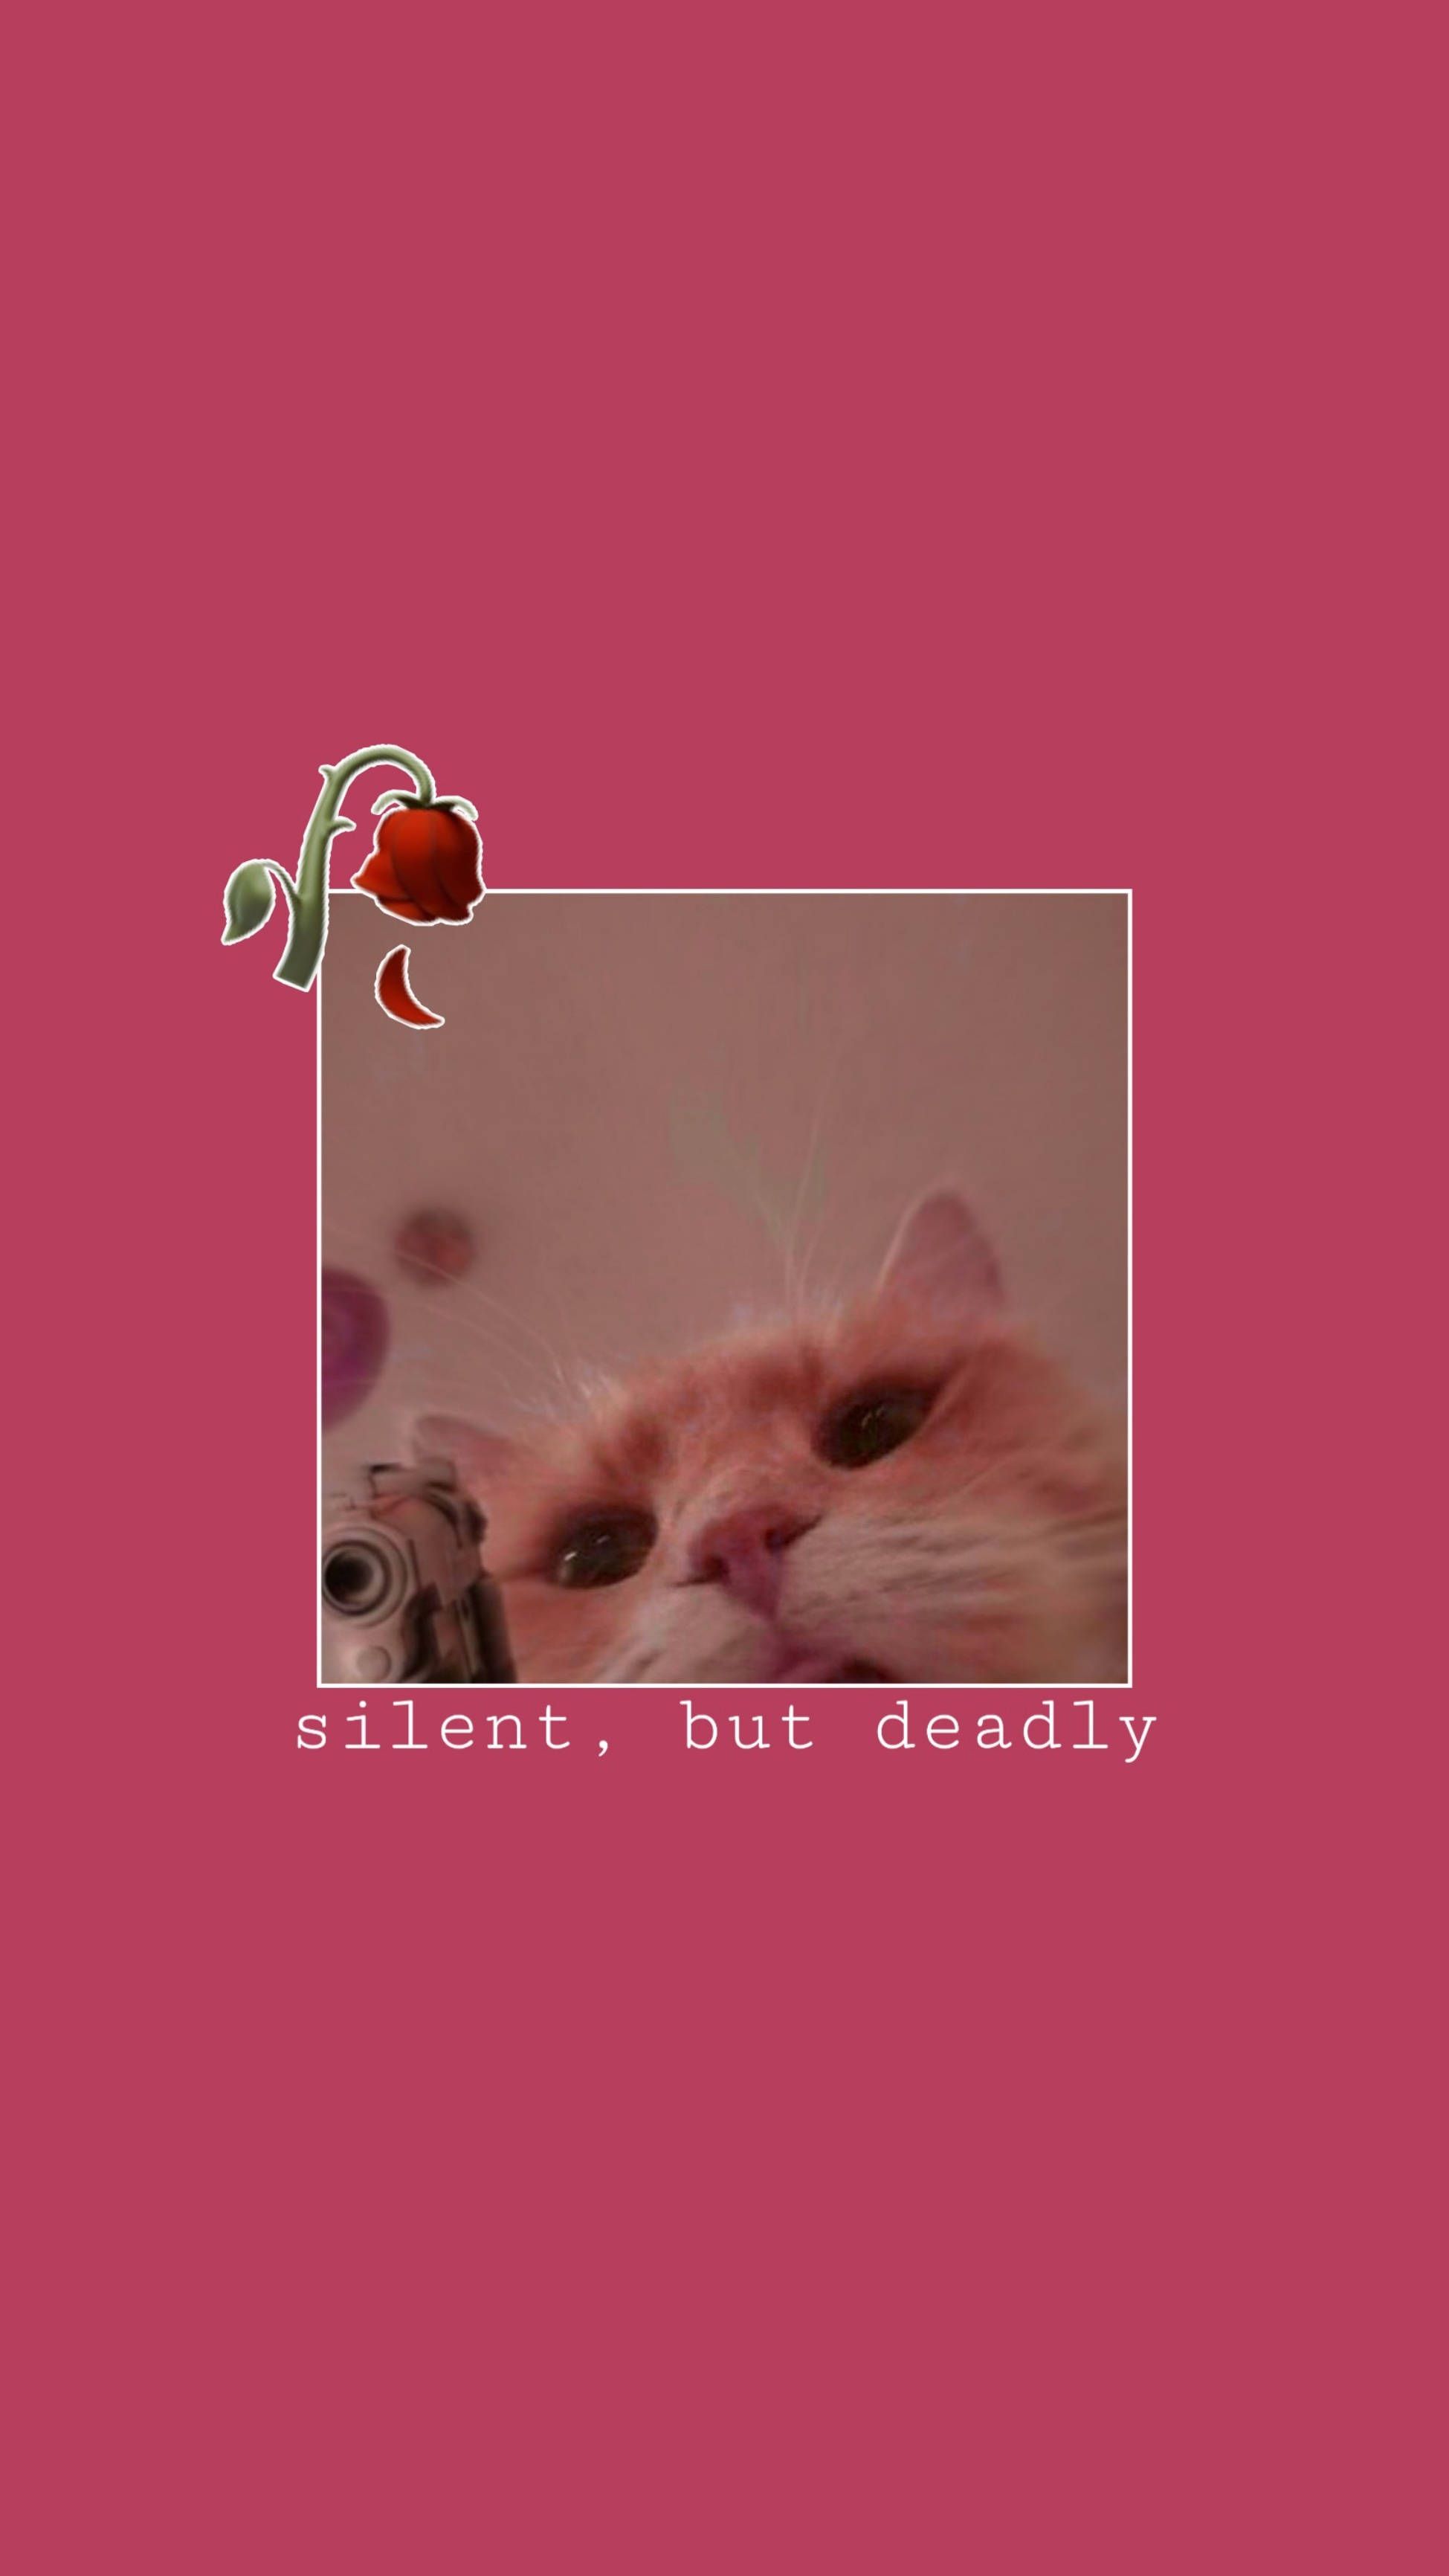 Download Cute Cat Aesthetic Silent But Lethal Wallpaper